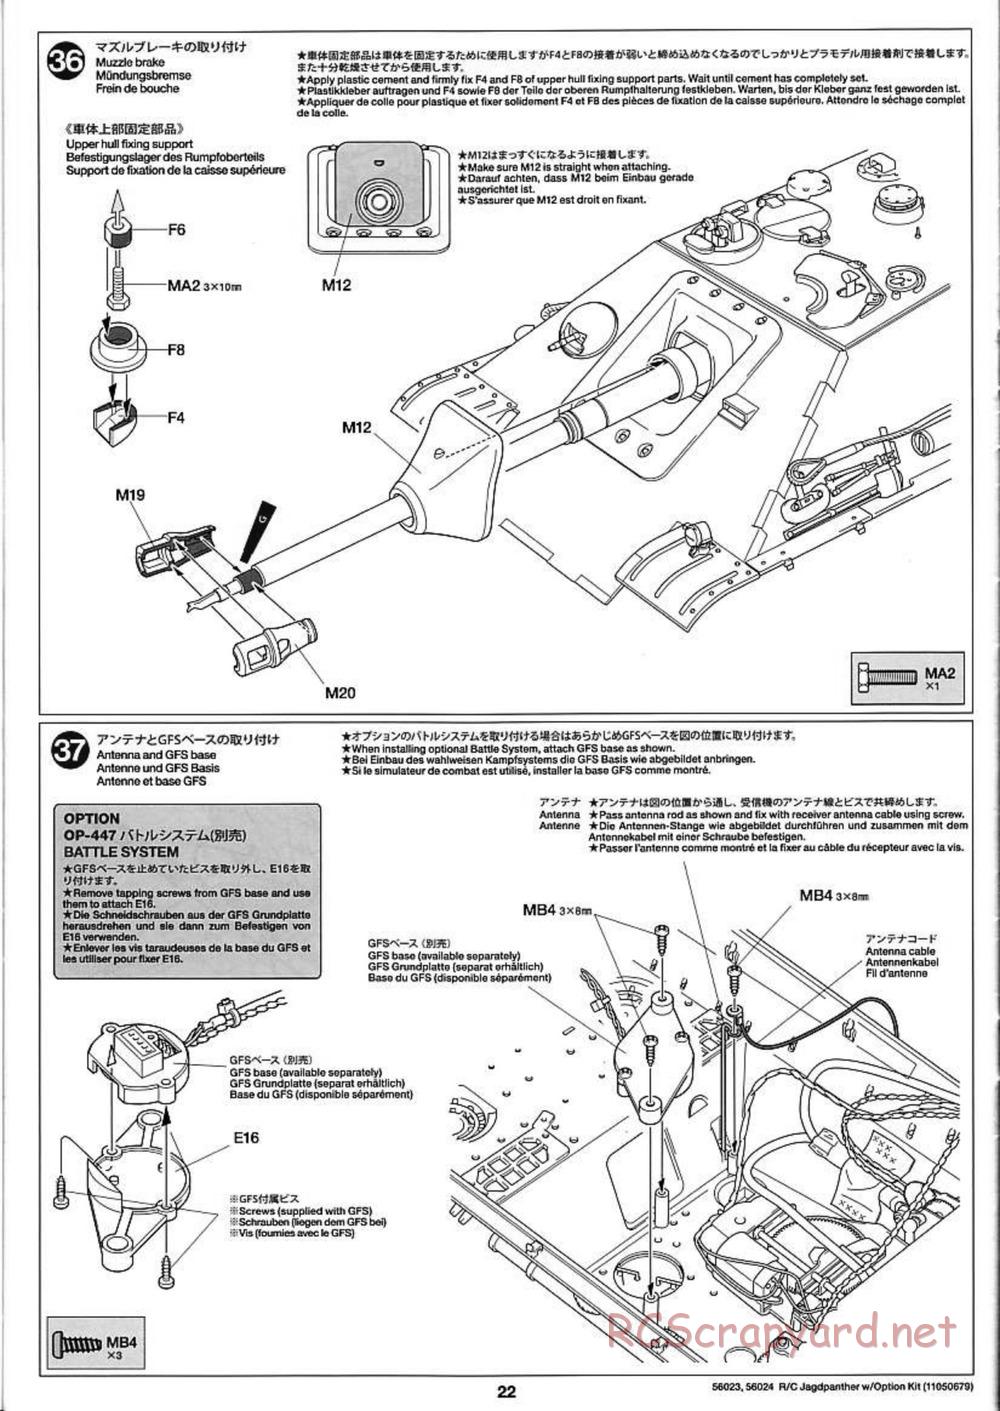 Tamiya - Jagdpanther - 1/16 Scale Chassis - Manual - Page 22